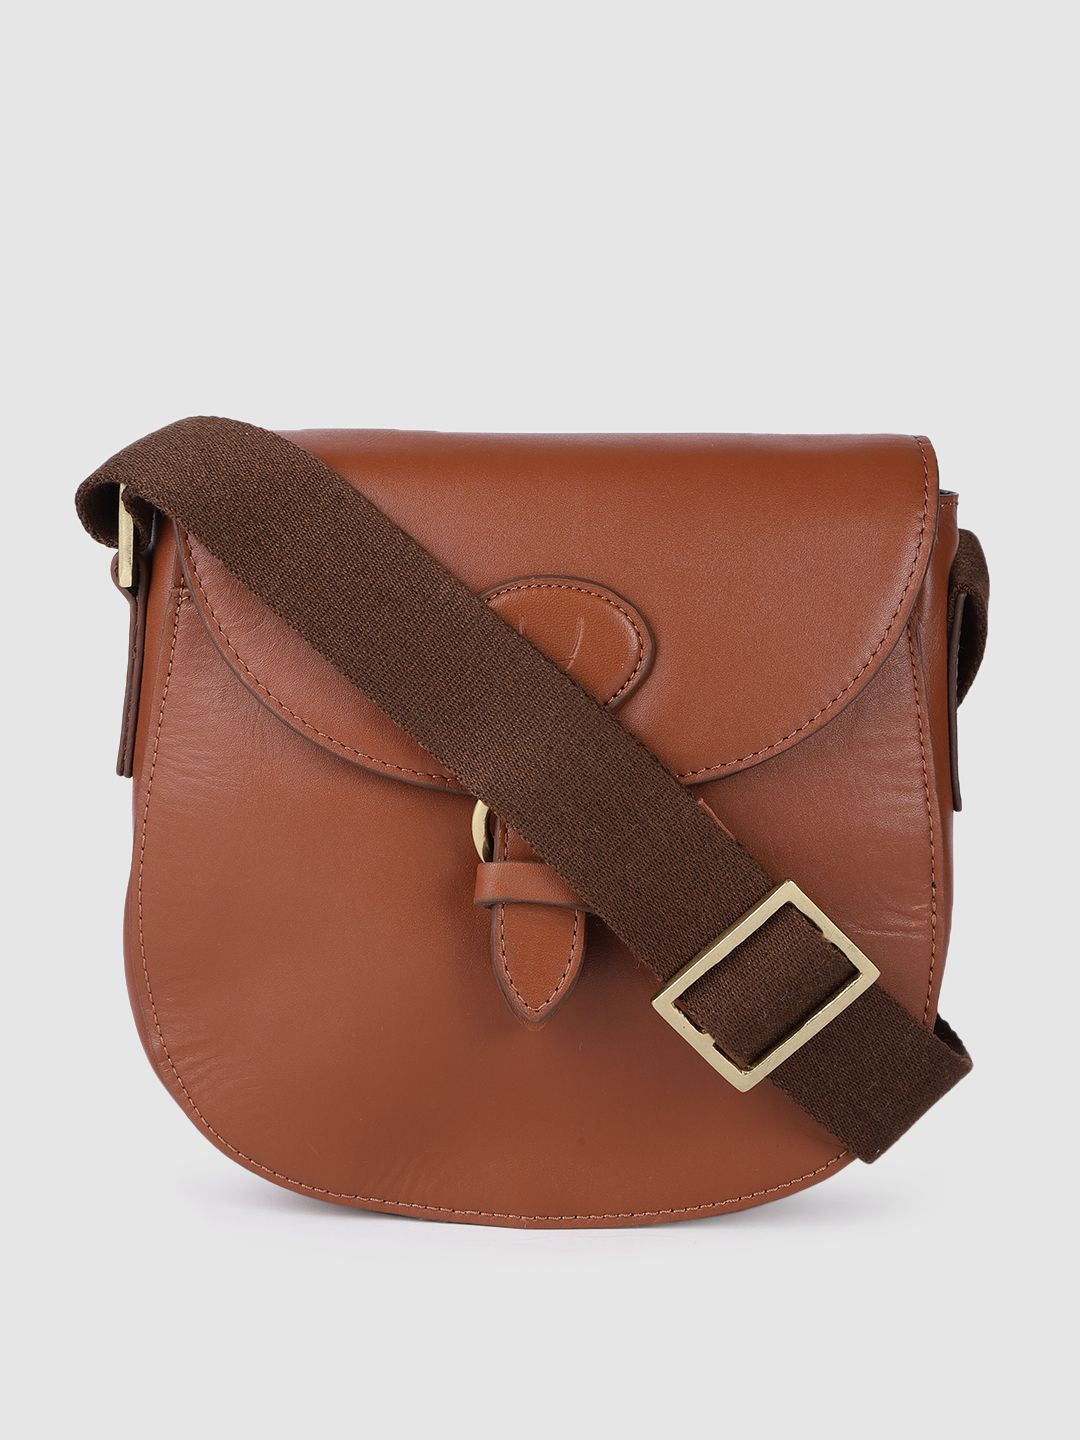 Hidesign Tan Leather Structured Sling Bag Price in India